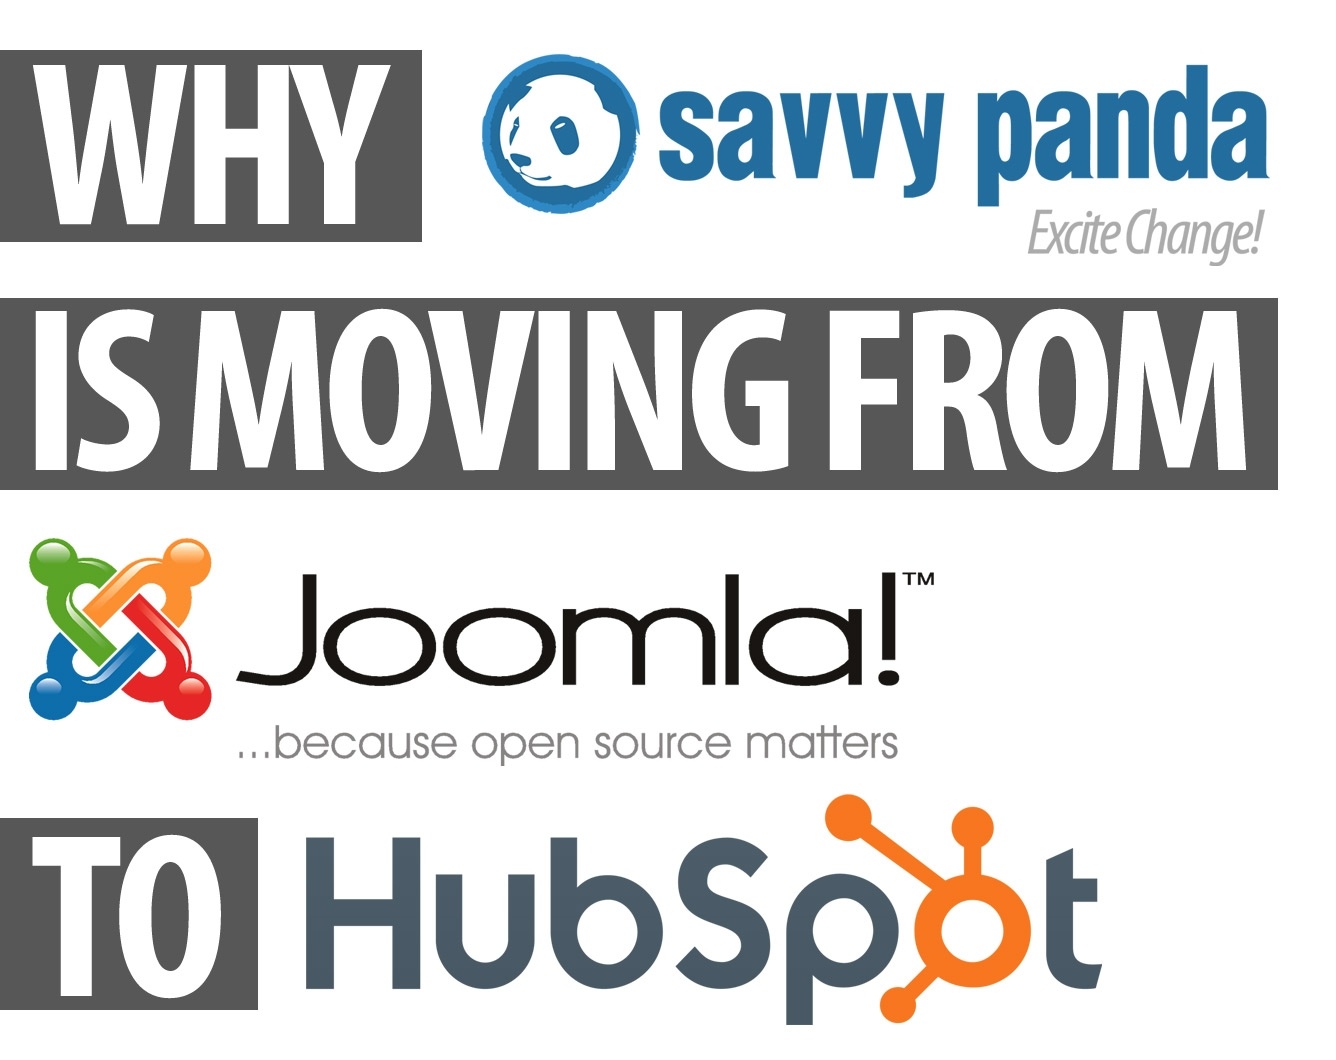 Why We Are Switching From Joomla to Hubspot